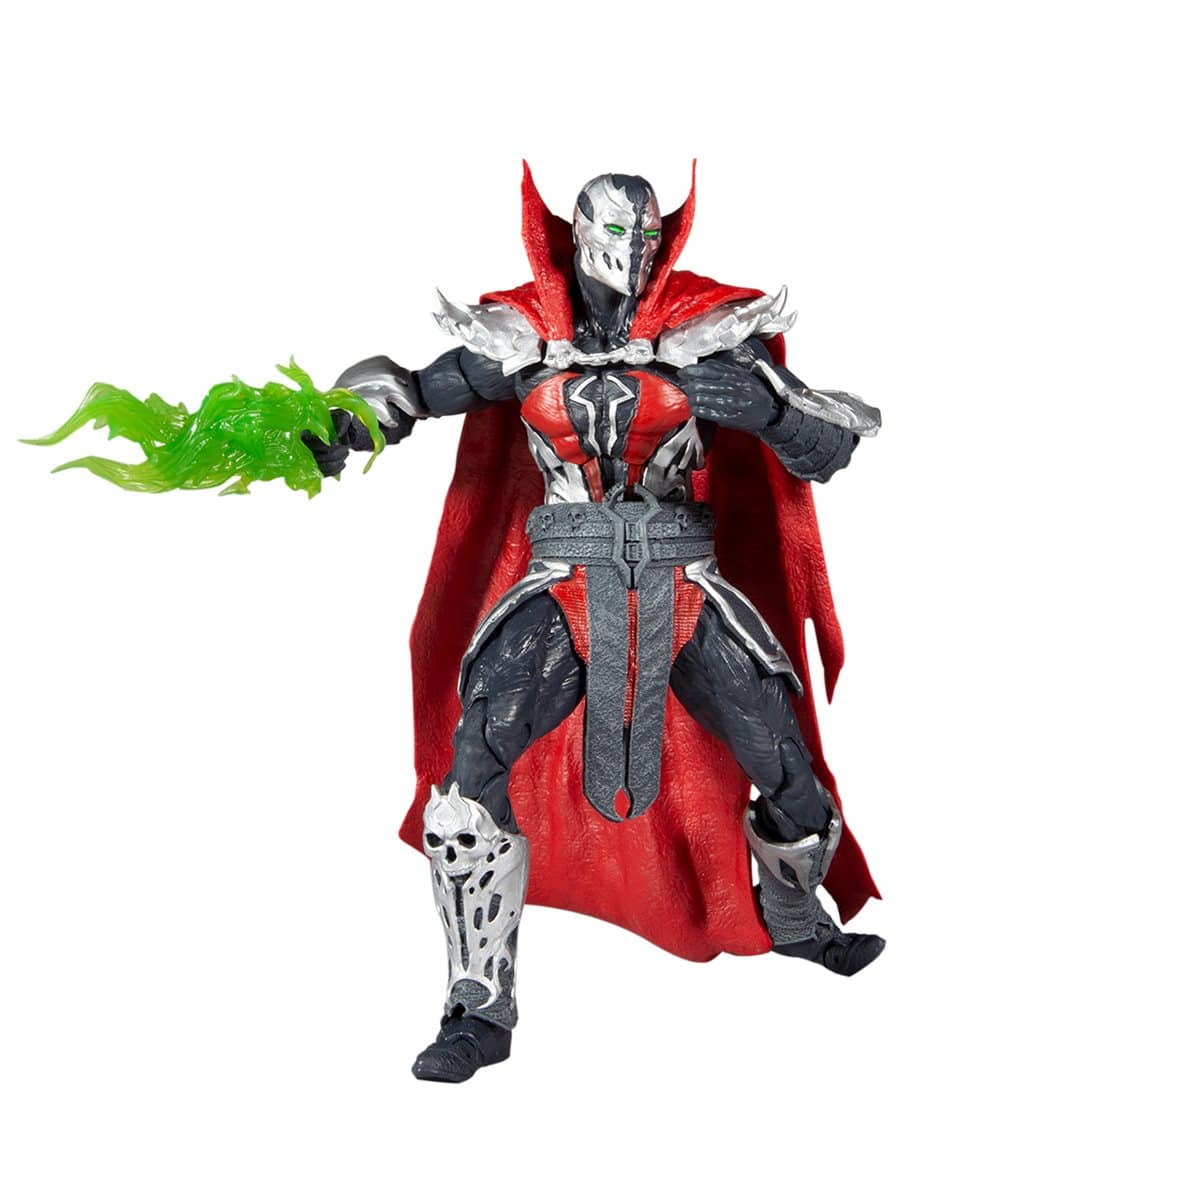 New Spawn Wave 1 Action Figures for 2021 from McFarlane Toys